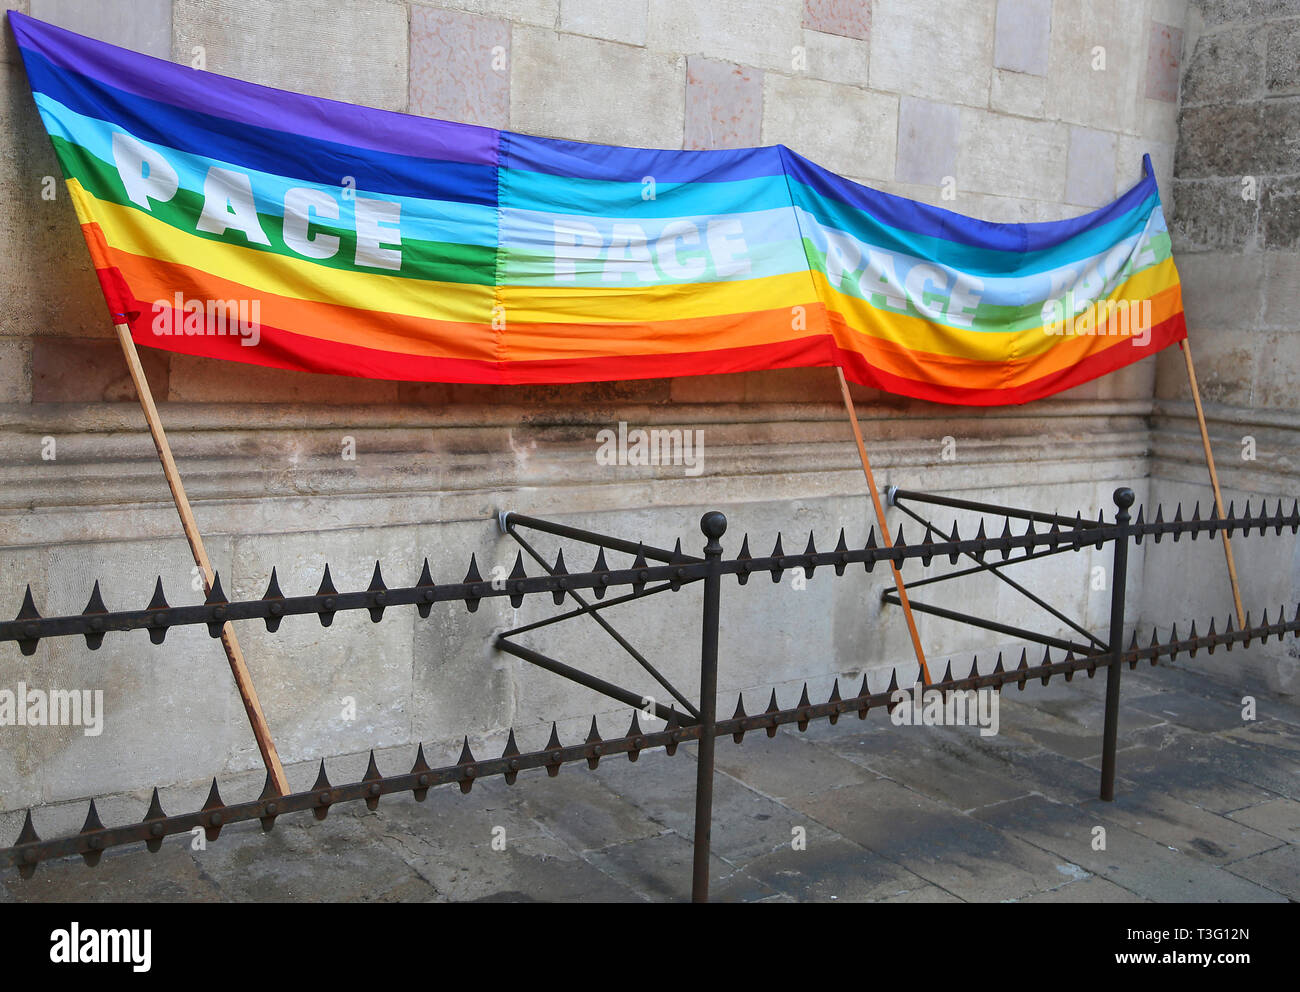 rainbow peace flag during a demonstration of Italian pacifists in an italian city behind grates Stock Photo